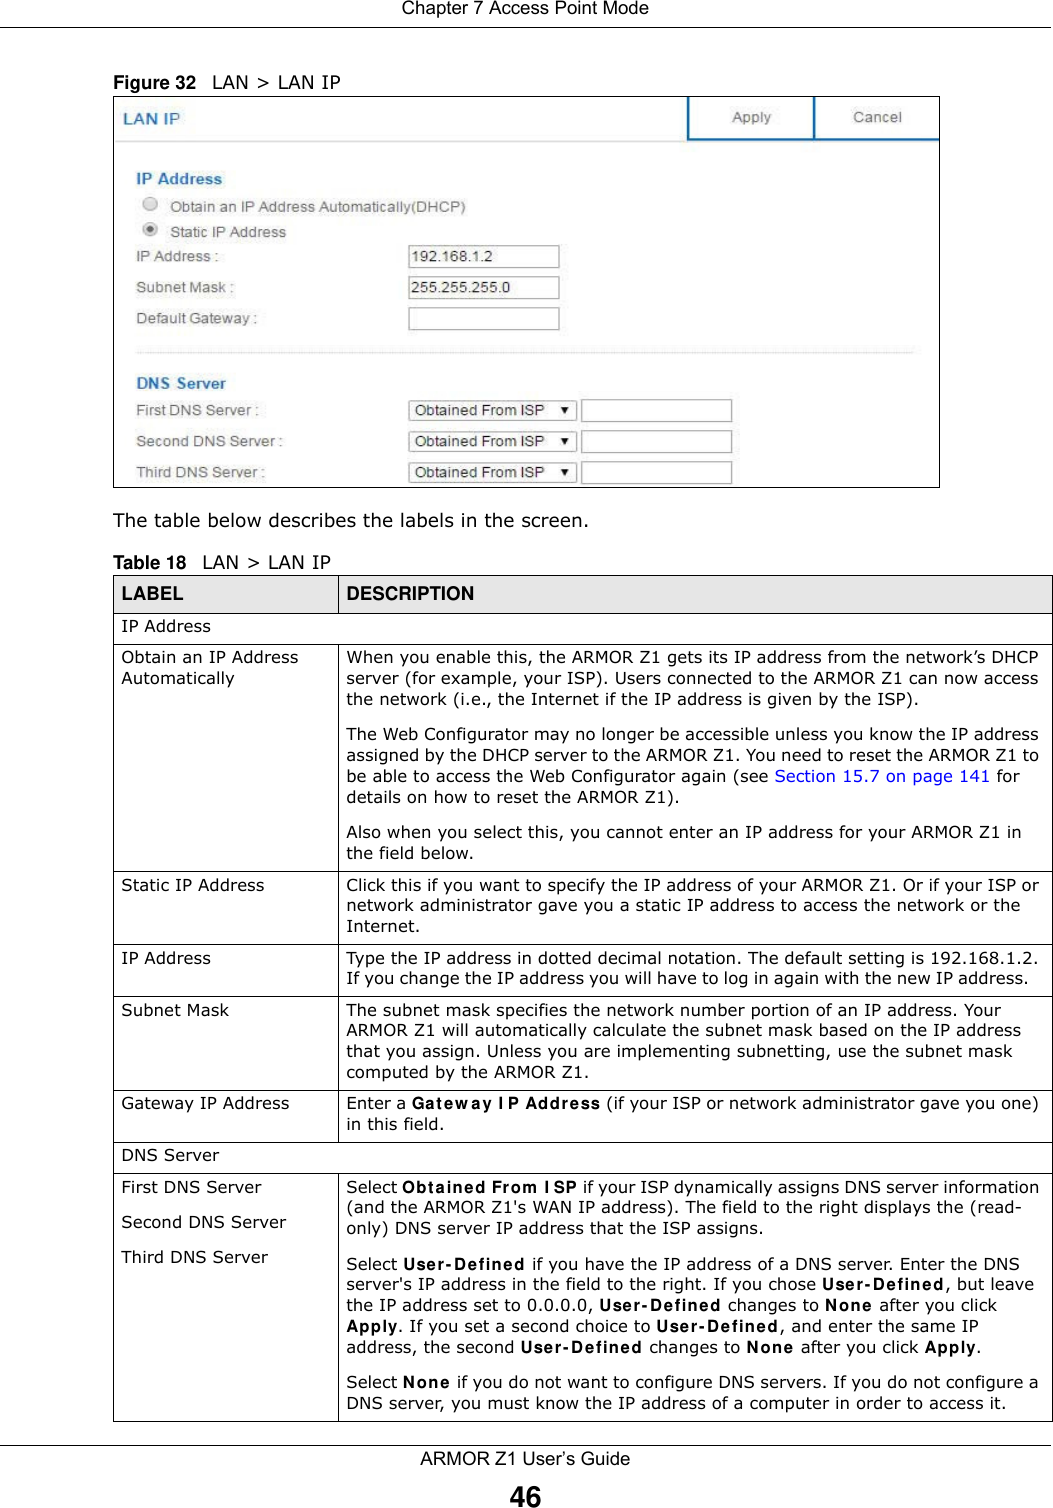 Chapter 7 Access Point ModeARMOR Z1 User’s Guide46Figure 32   LAN &gt; LAN IP   The table below describes the labels in the screen.Table 18   LAN &gt; LAN IPLABEL DESCRIPTIONIP AddressObtain an IP Address AutomaticallyWhen you enable this, the ARMOR Z1 gets its IP address from the network’s DHCP server (for example, your ISP). Users connected to the ARMOR Z1 can now access the network (i.e., the Internet if the IP address is given by the ISP).The Web Configurator may no longer be accessible unless you know the IP address assigned by the DHCP server to the ARMOR Z1. You need to reset the ARMOR Z1 to be able to access the Web Configurator again (see Section 15.7 on page 141 for details on how to reset the ARMOR Z1).Also when you select this, you cannot enter an IP address for your ARMOR Z1 in the field below.Static IP Address Click this if you want to specify the IP address of your ARMOR Z1. Or if your ISP or network administrator gave you a static IP address to access the network or the Internet.IP Address Type the IP address in dotted decimal notation. The default setting is 192.168.1.2. If you change the IP address you will have to log in again with the new IP address.   Subnet Mask The subnet mask specifies the network number portion of an IP address. Your ARMOR Z1 will automatically calculate the subnet mask based on the IP address that you assign. Unless you are implementing subnetting, use the subnet mask computed by the ARMOR Z1.Gateway IP Address Enter a Gateway IP Address (if your ISP or network administrator gave you one) in this field.DNS ServerFirst DNS ServerSecond DNS ServerThird DNS Server Select Obtained From ISP if your ISP dynamically assigns DNS server information (and the ARMOR Z1&apos;s WAN IP address). The field to the right displays the (read-only) DNS server IP address that the ISP assigns. Select User-Defined if you have the IP address of a DNS server. Enter the DNS server&apos;s IP address in the field to the right. If you chose User-Defined, but leave the IP address set to 0.0.0.0, User-Defined changes to None after you click Apply. If you set a second choice to User-Defined, and enter the same IP address, the second User-Defined changes to None after you click Apply. Select None if you do not want to configure DNS servers. If you do not configure a DNS server, you must know the IP address of a computer in order to access it.